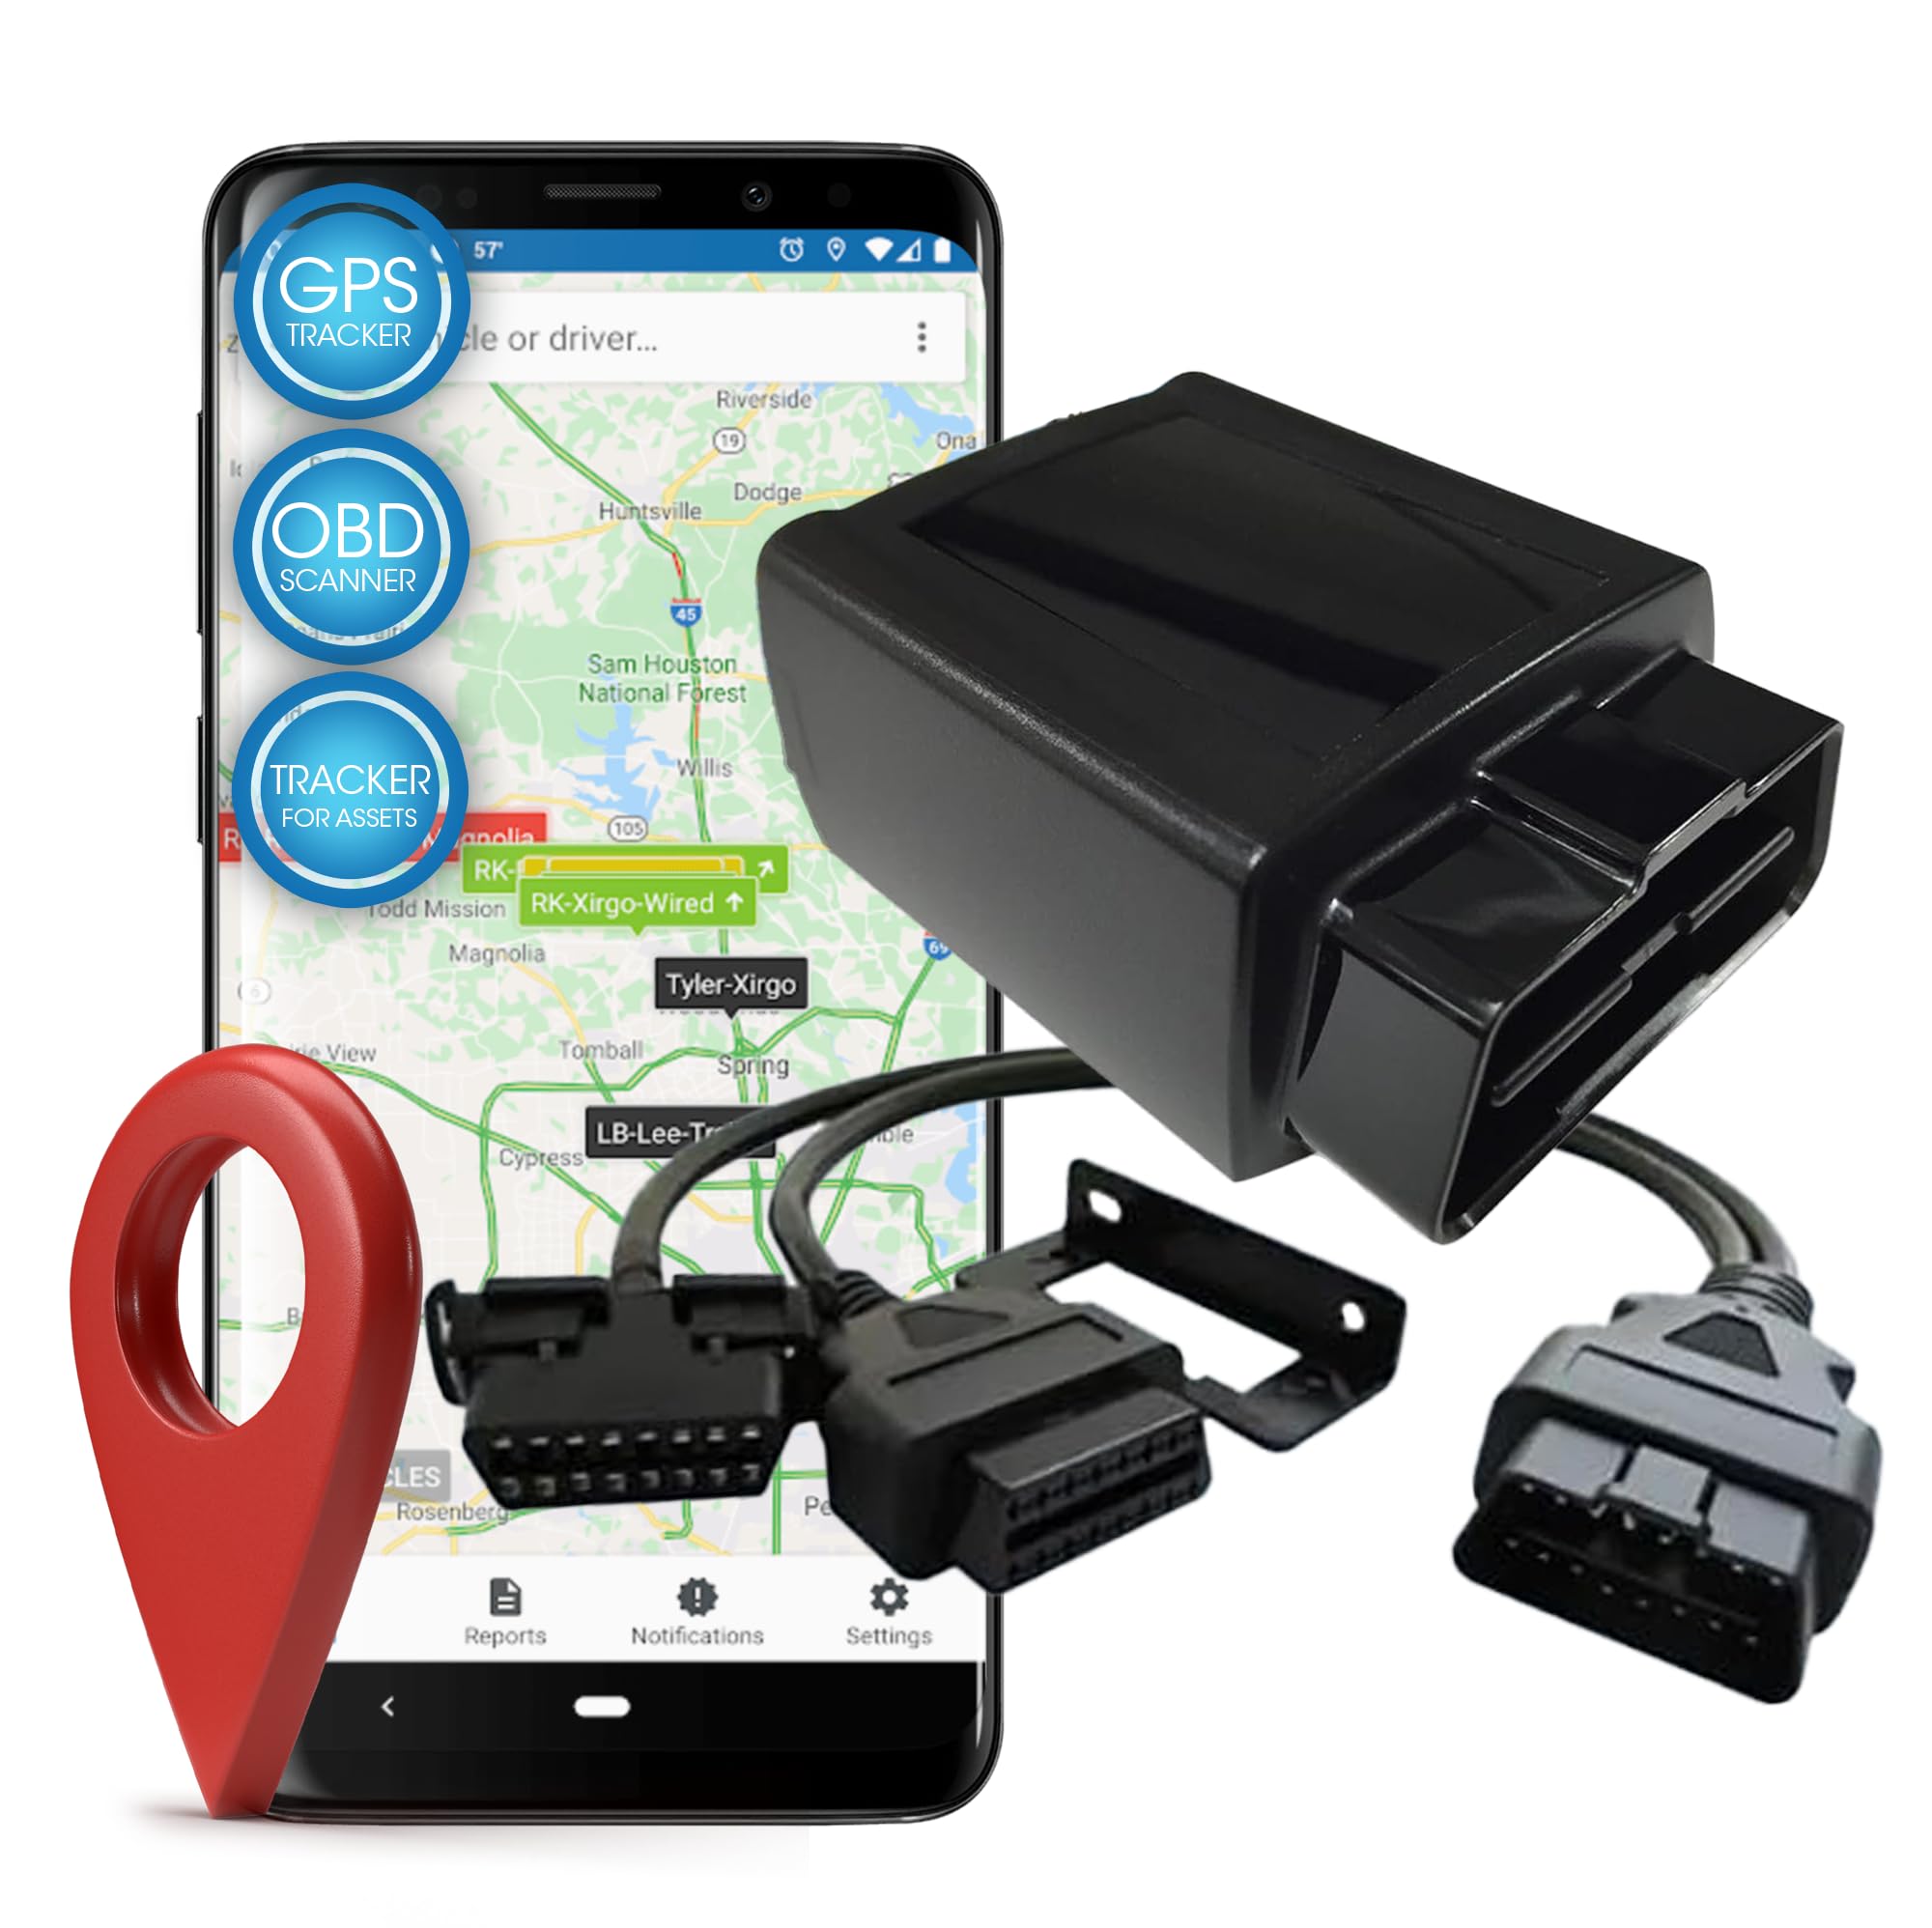 LoneStar Tracking DiscoveryLTE OBD-2 Tracking Device for Cars with ODB2 Y Cable Bundle - Plug and Play ODB GPS Tracker, Car GPS Tracker, Plug in Car Tracker (Subscription Required)